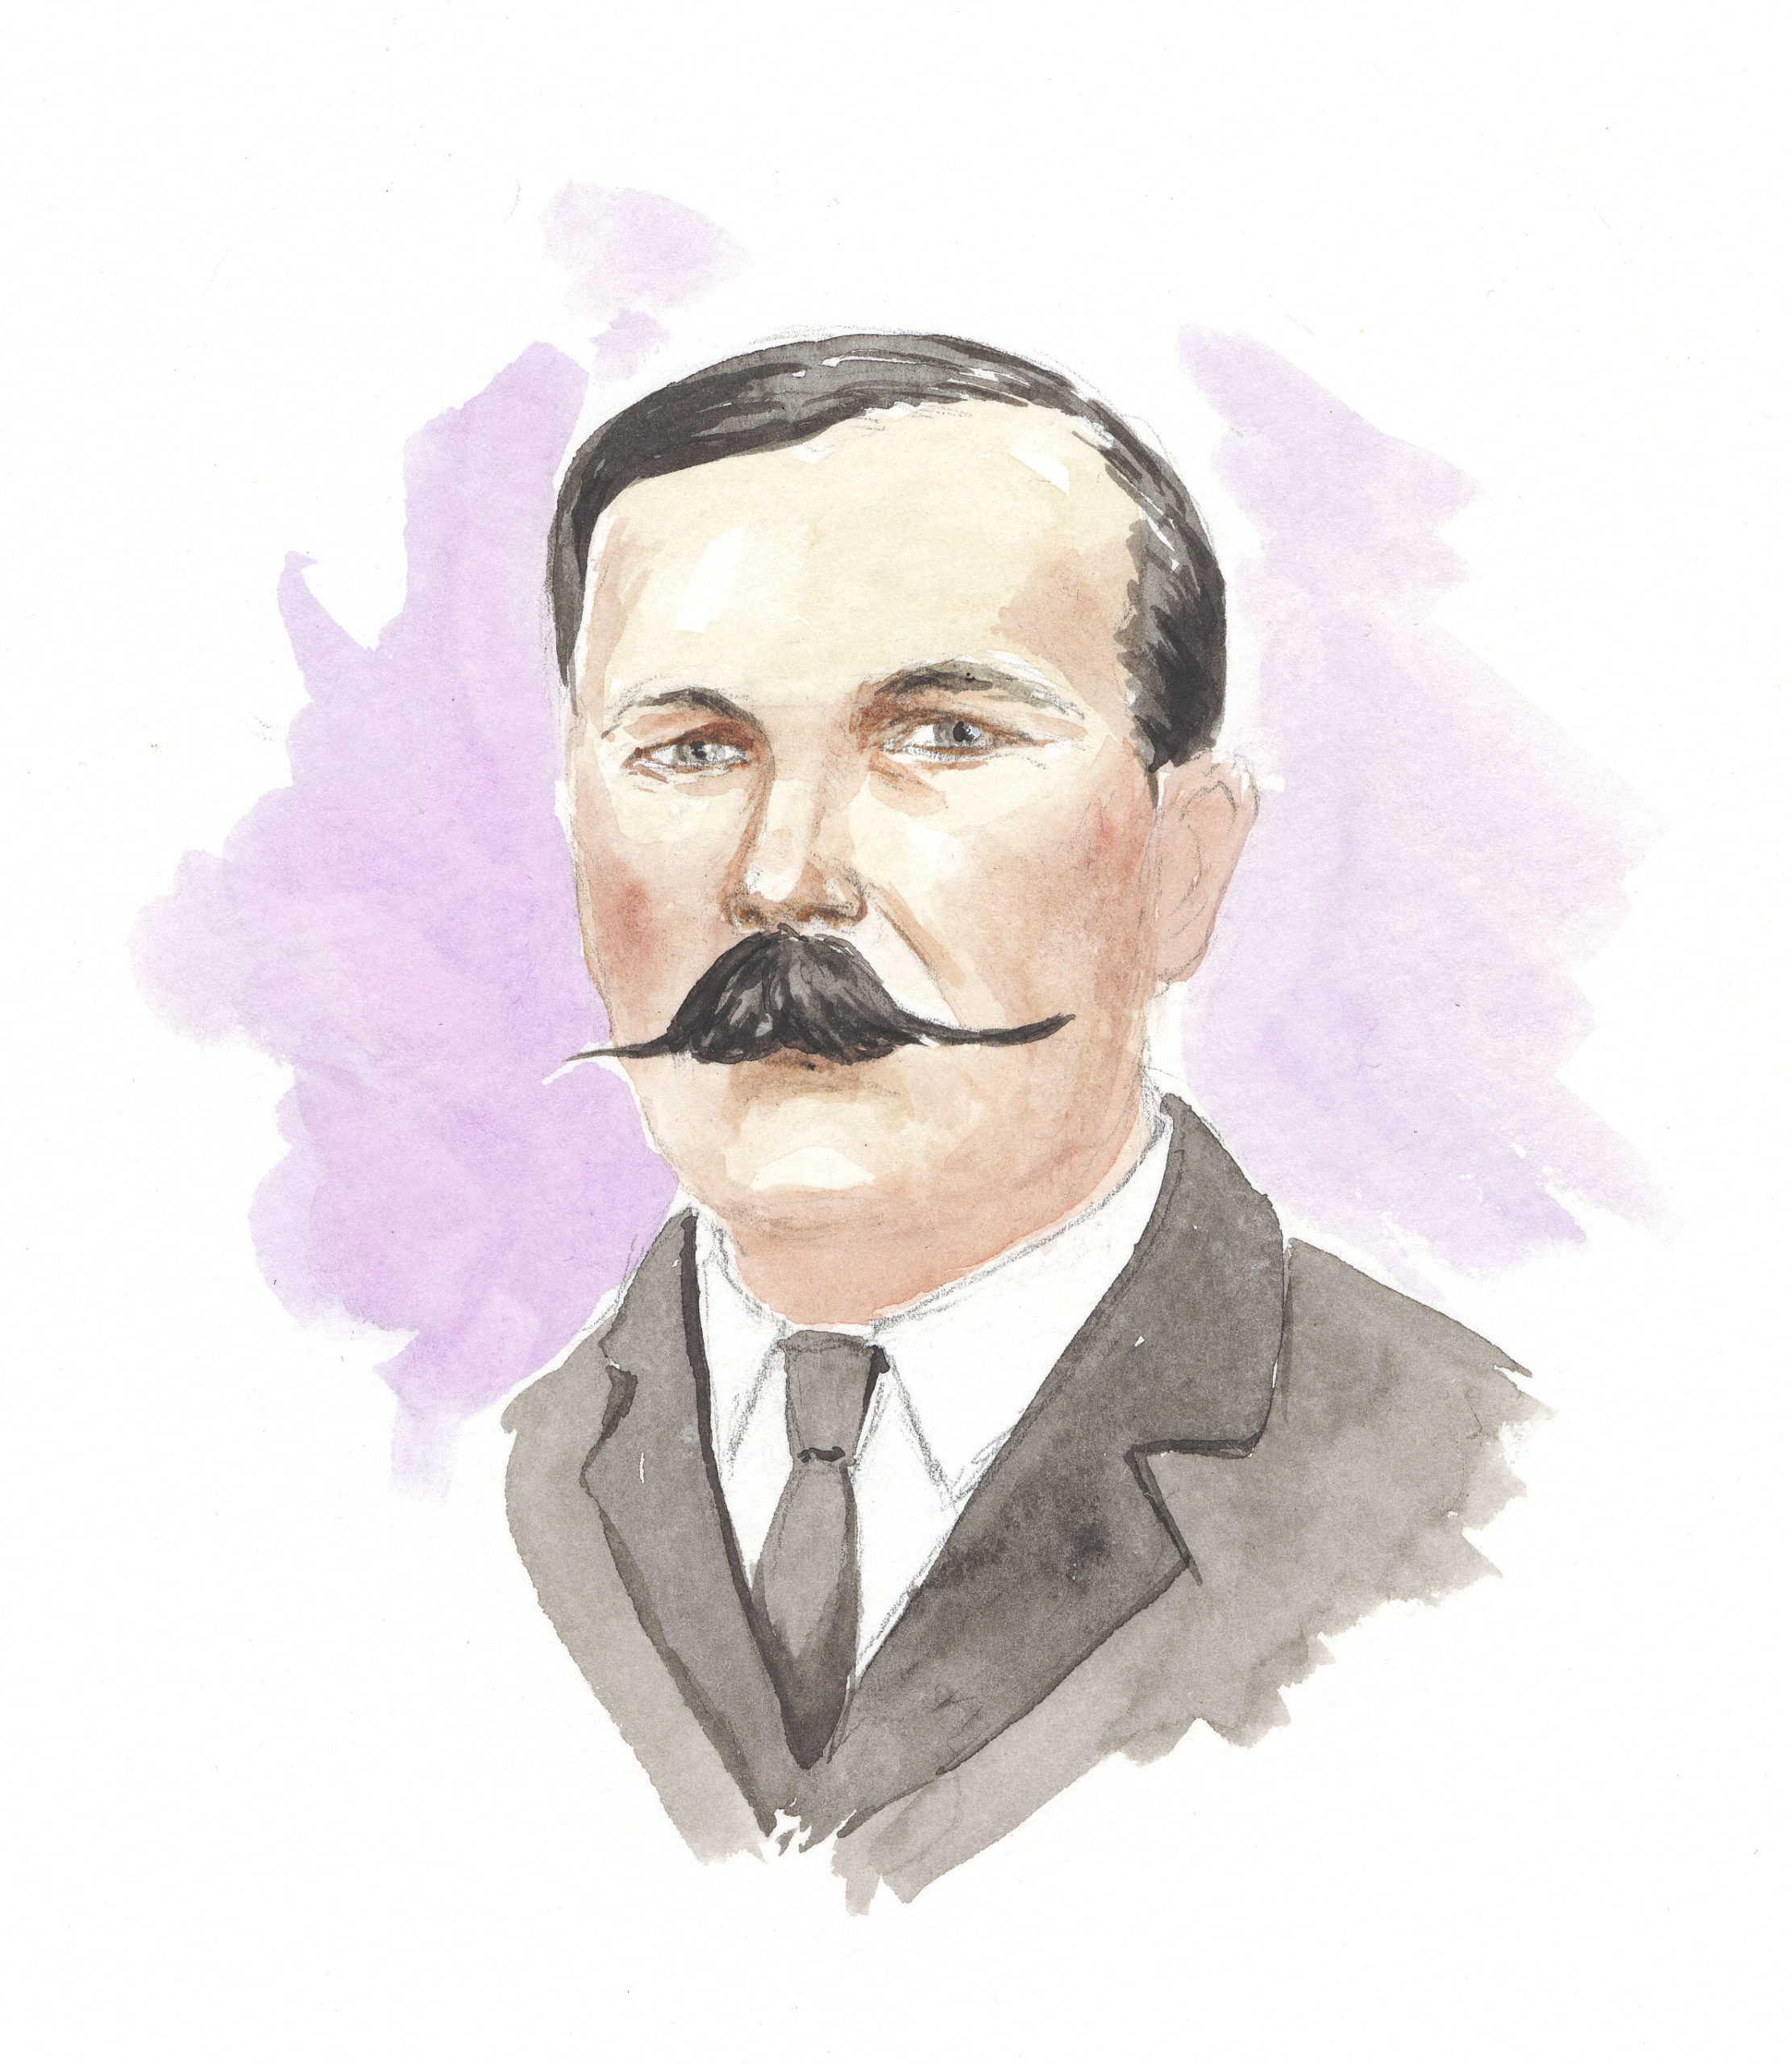 Watercolour image of a man with a moustache.